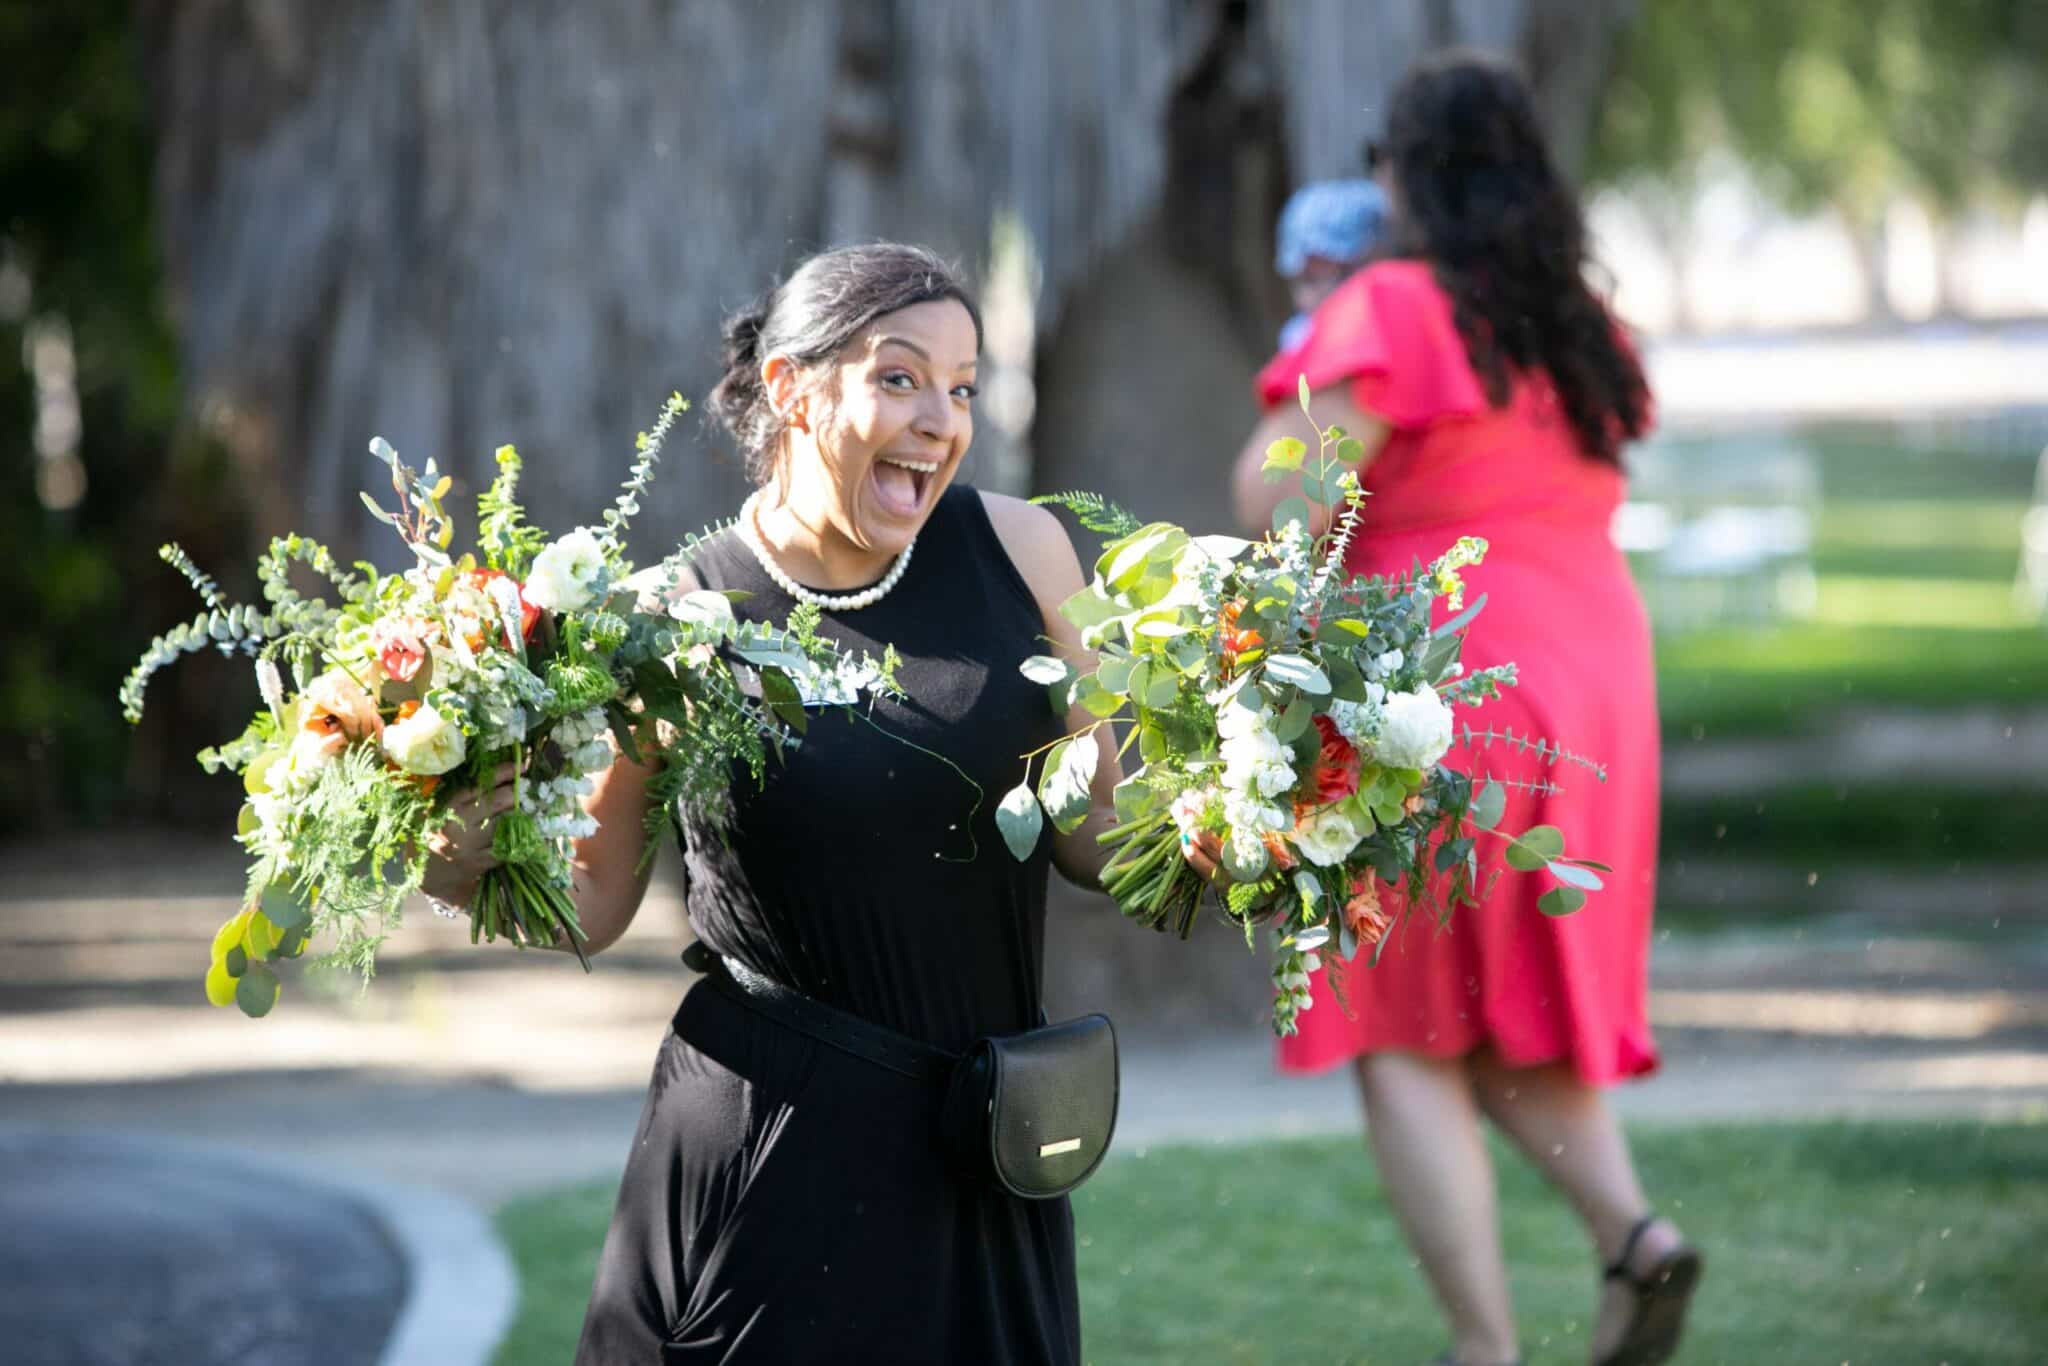 Meet the Team – Leticia Flores – Our Lead Wedding & Event Assistant